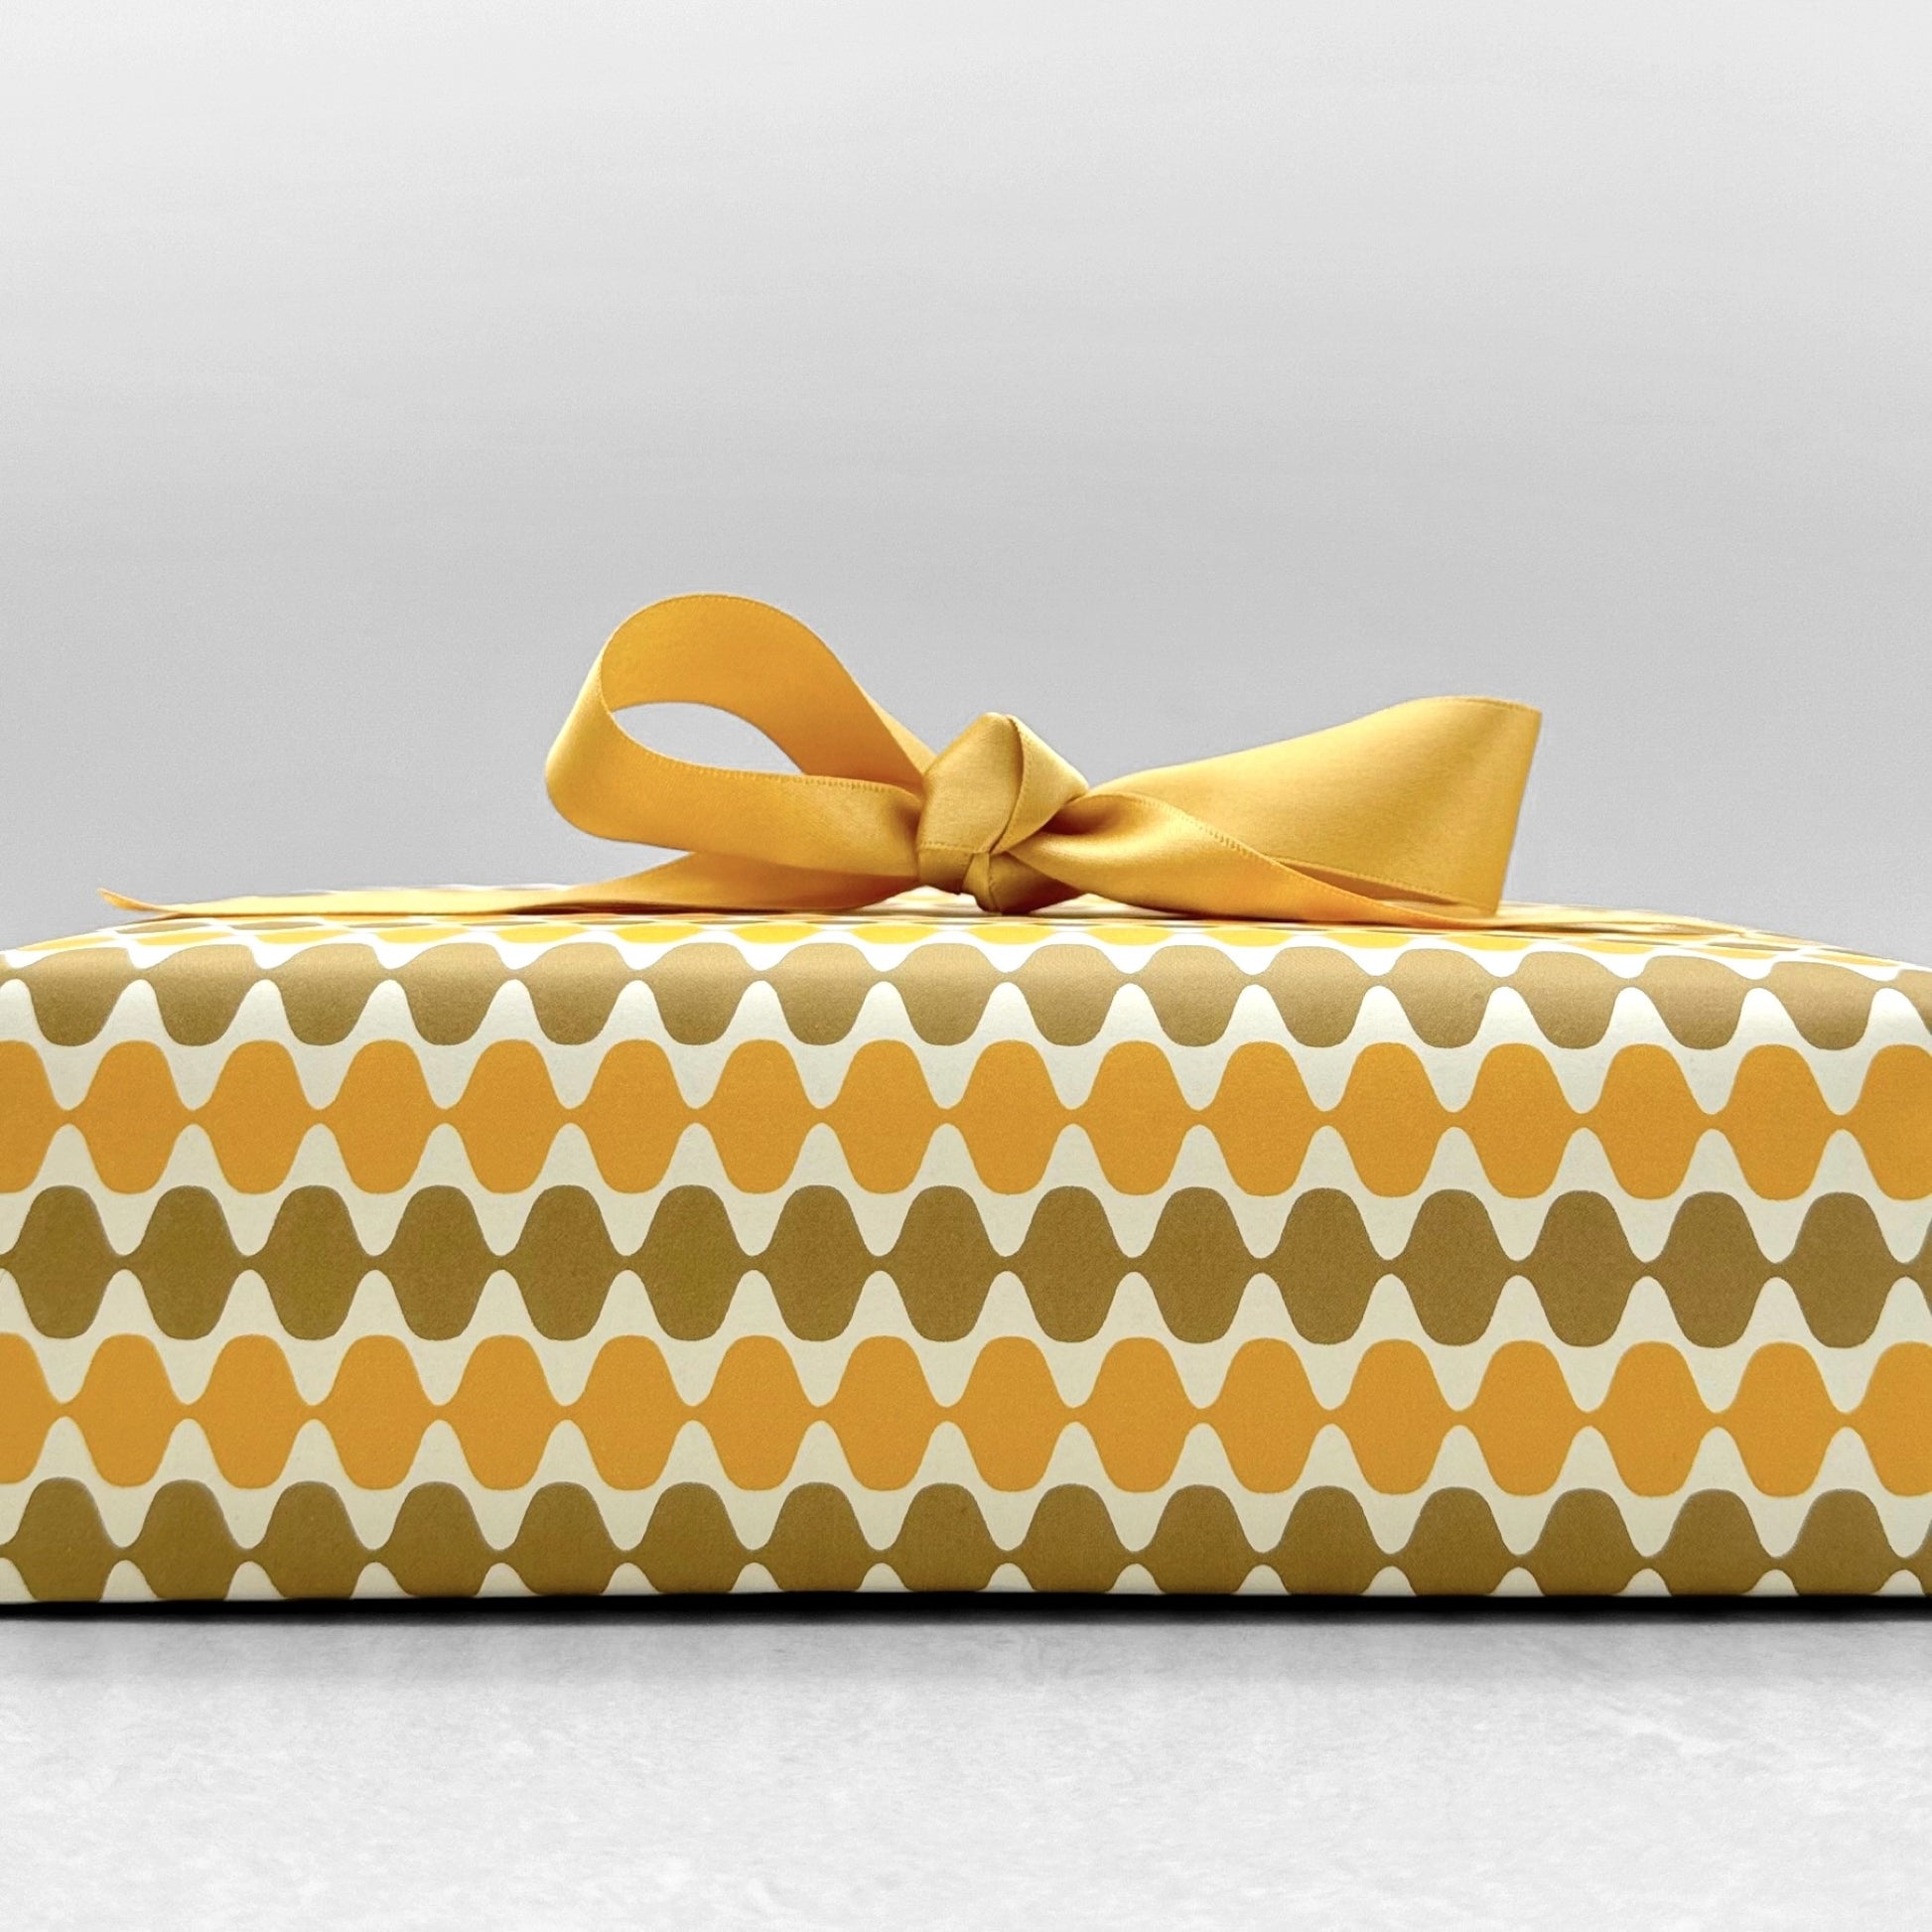 wrapping paper by Otto Editions with a cut-out wavy design in white on a yellow and gold background. Pictured wrapped as a present with a yellow bow